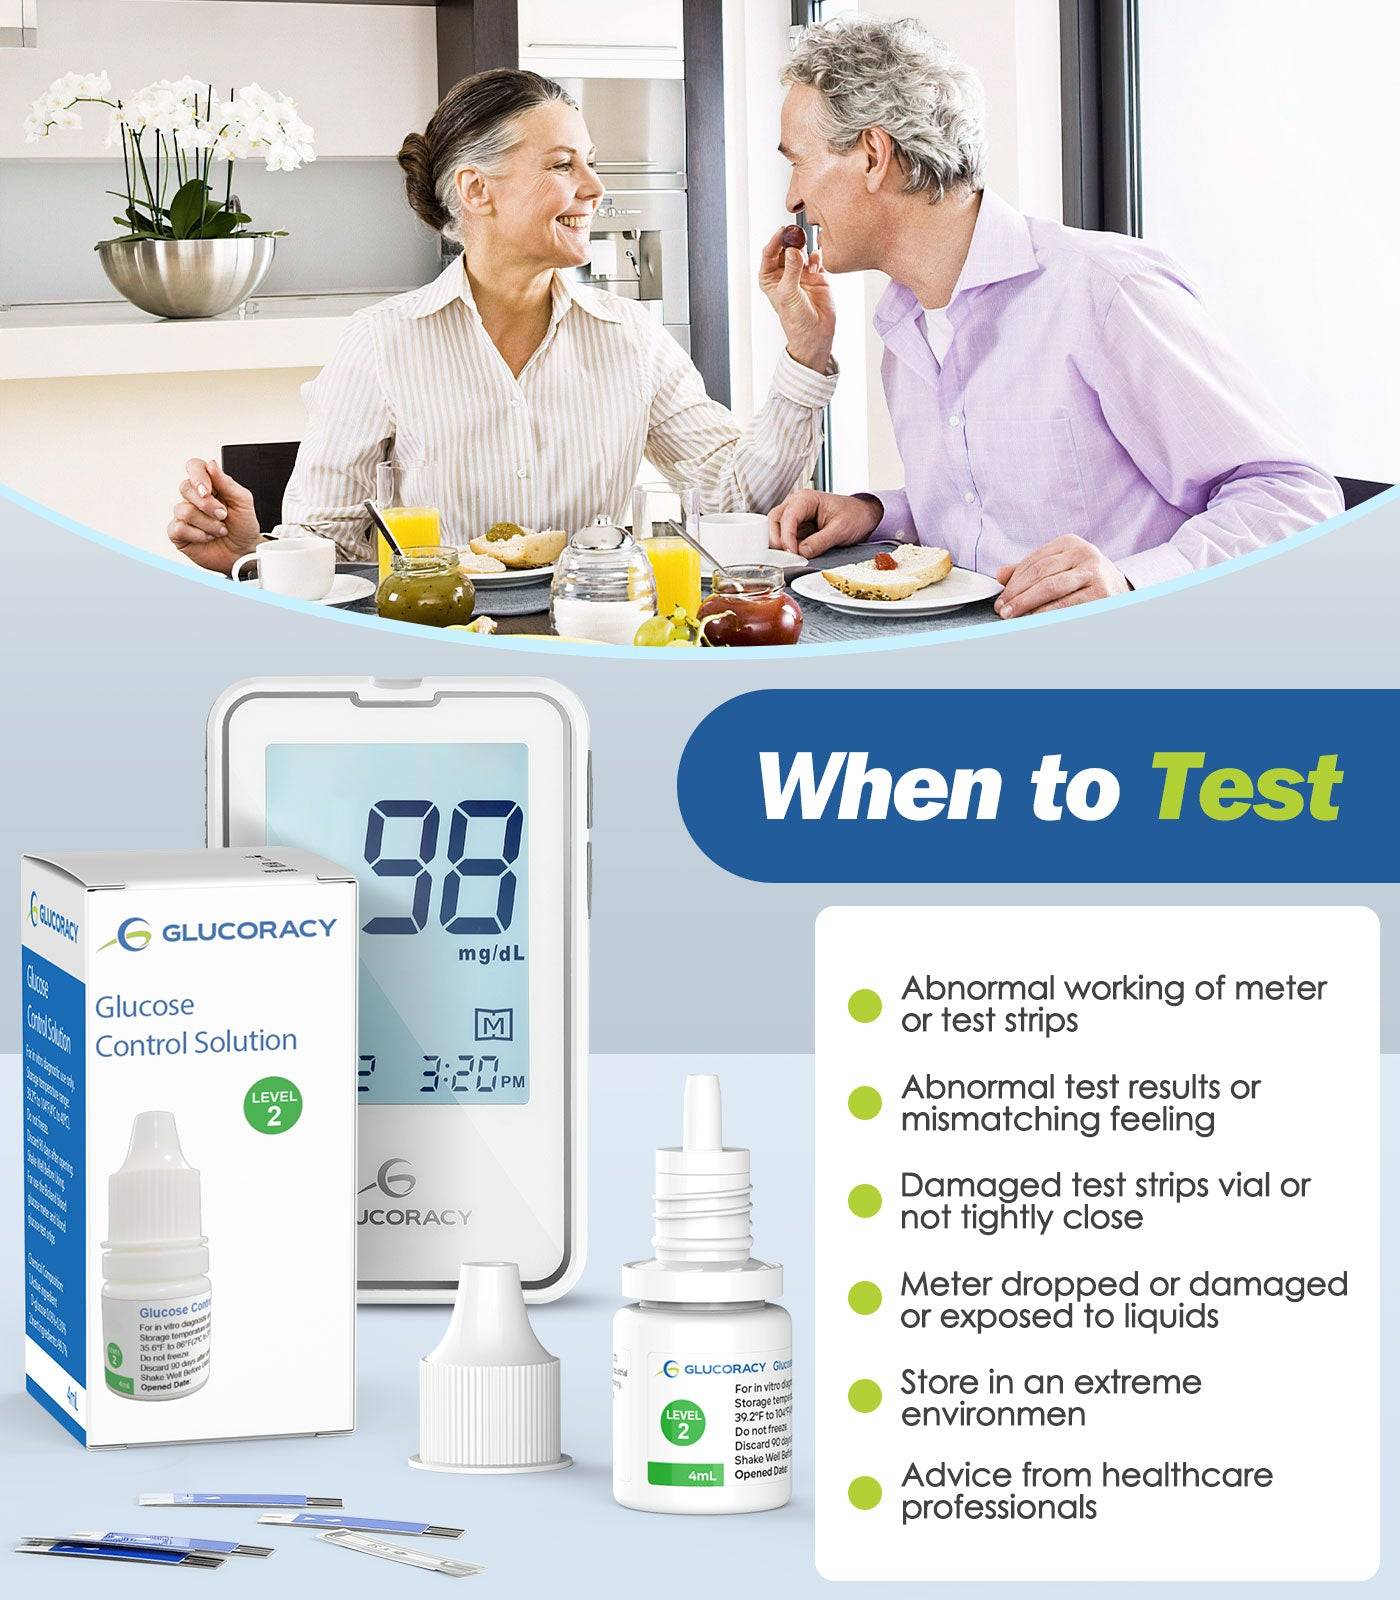 Glucoracy g-425-2 Glucose Control Solution when to test